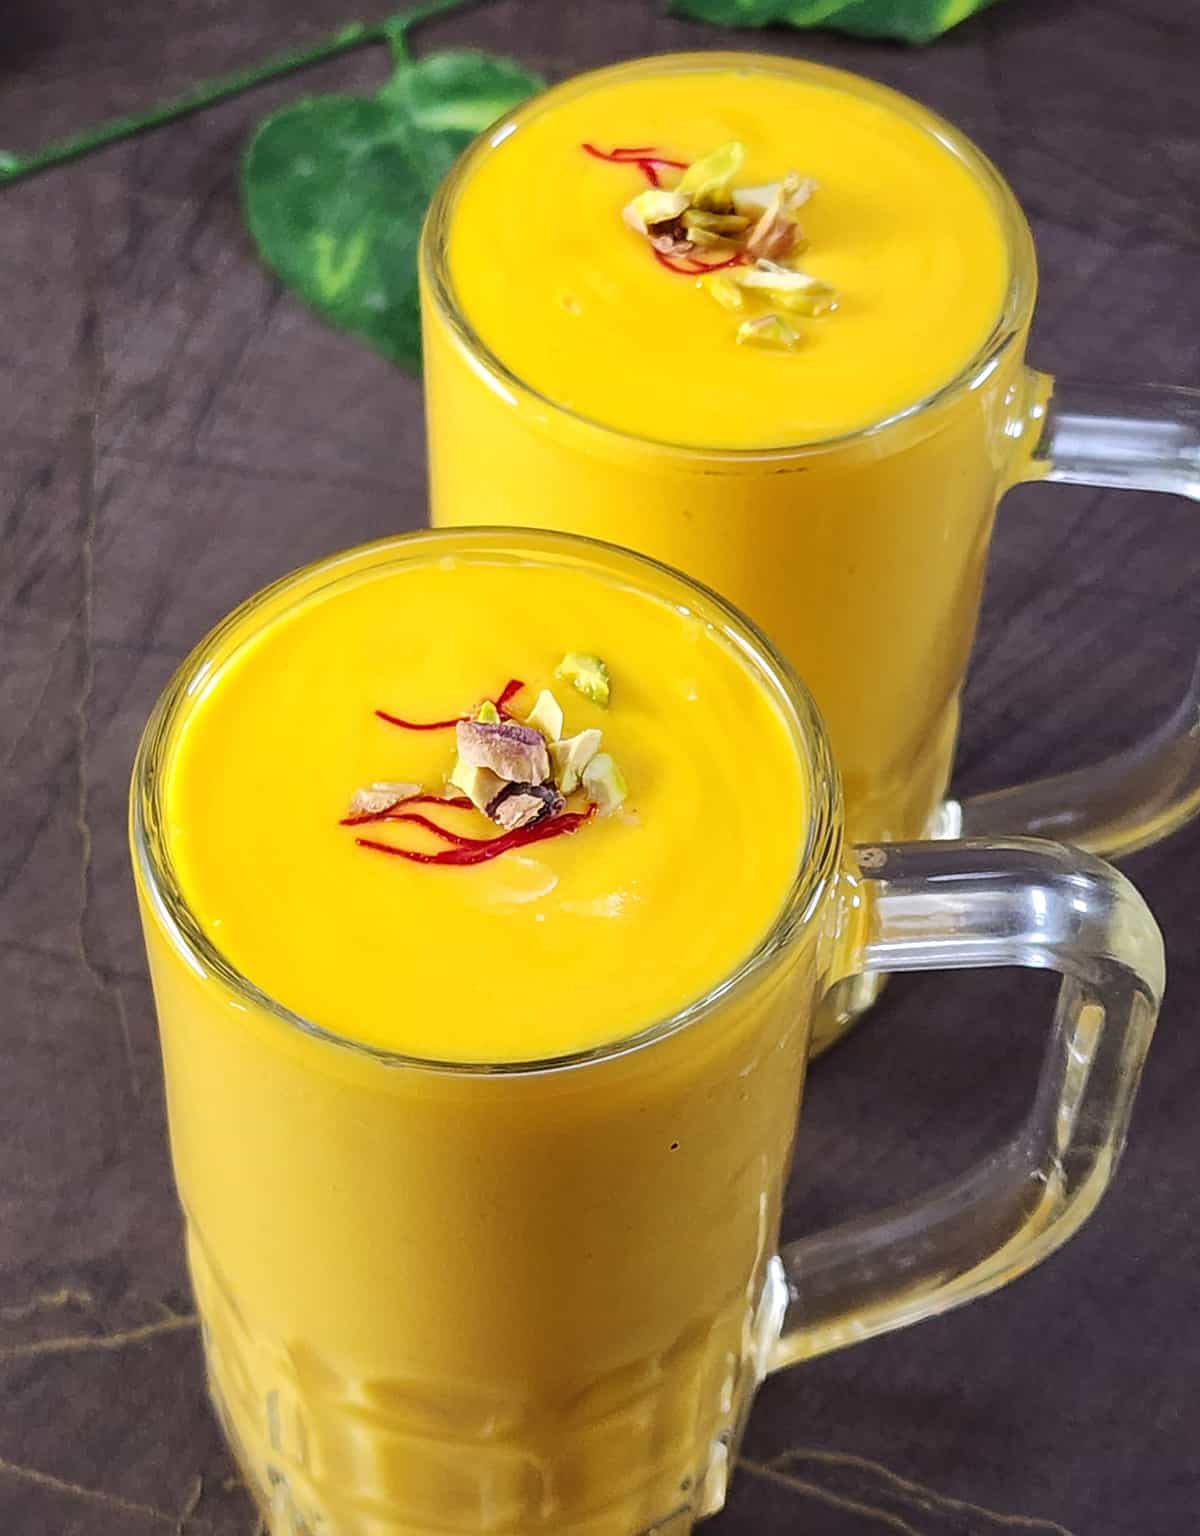 Two glasses of best mango lassi or mango smoothie garnished with saffron and chopped pistachios.